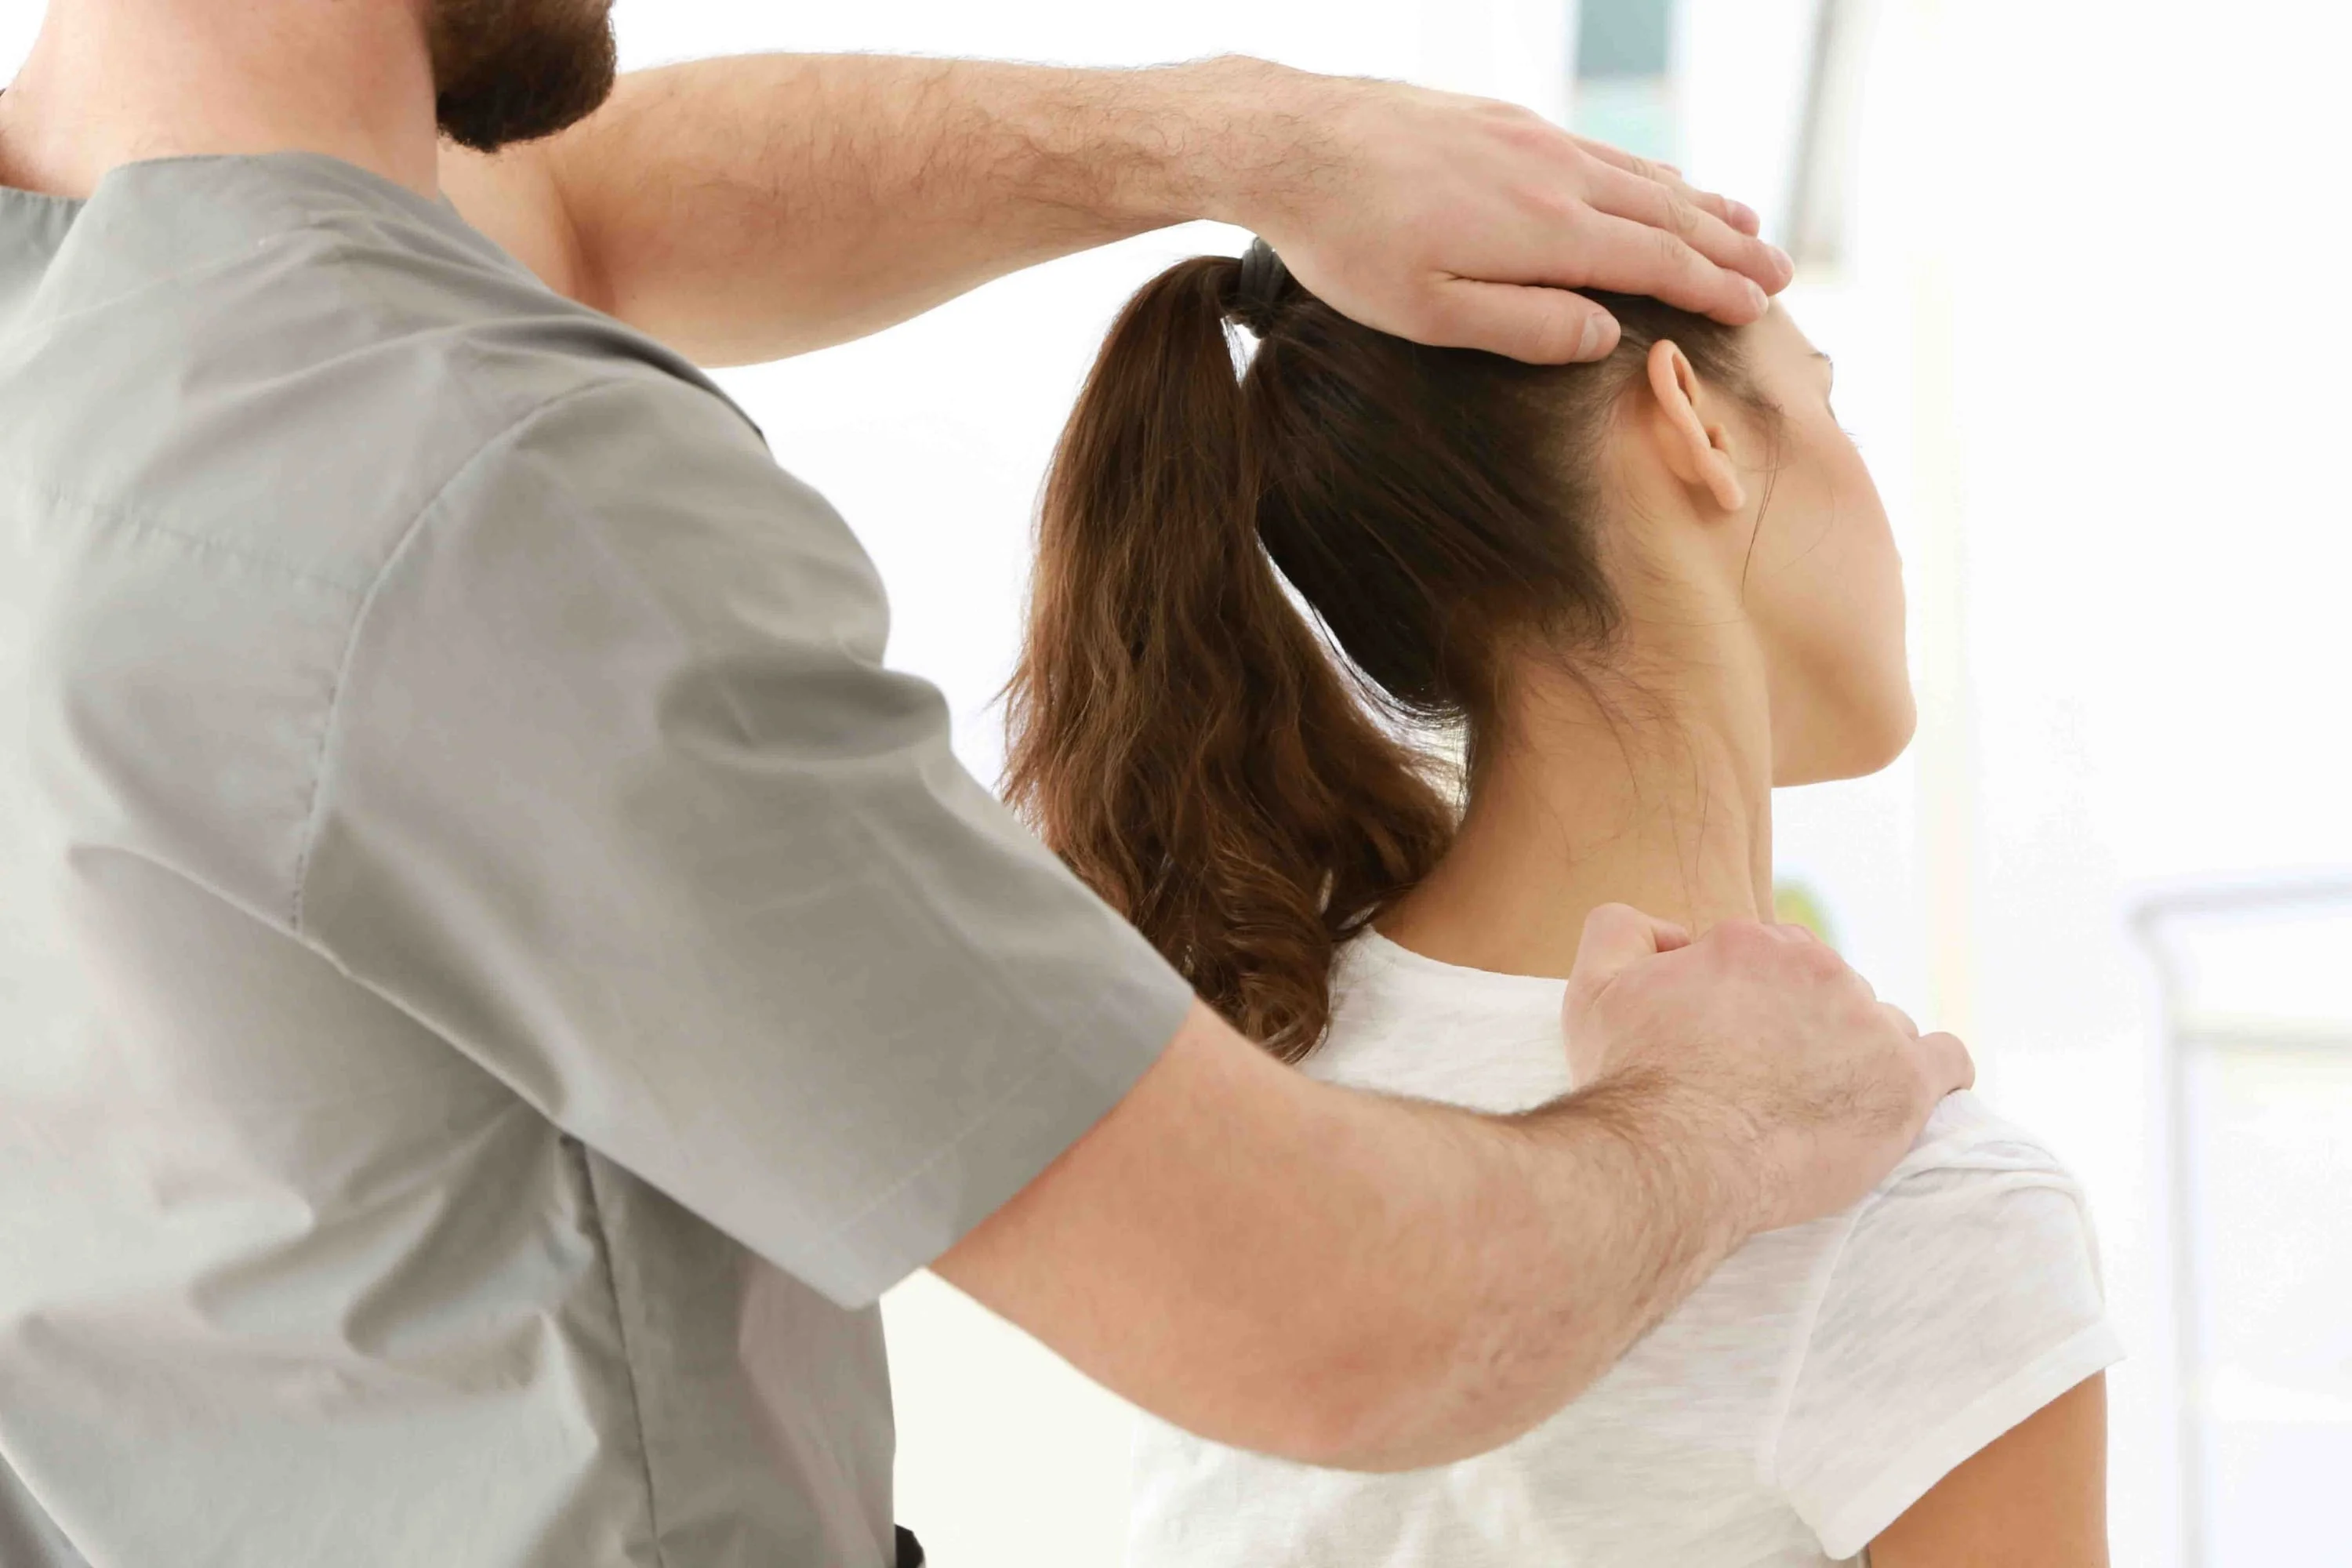 Work With Our Trusted Chiropractor Today